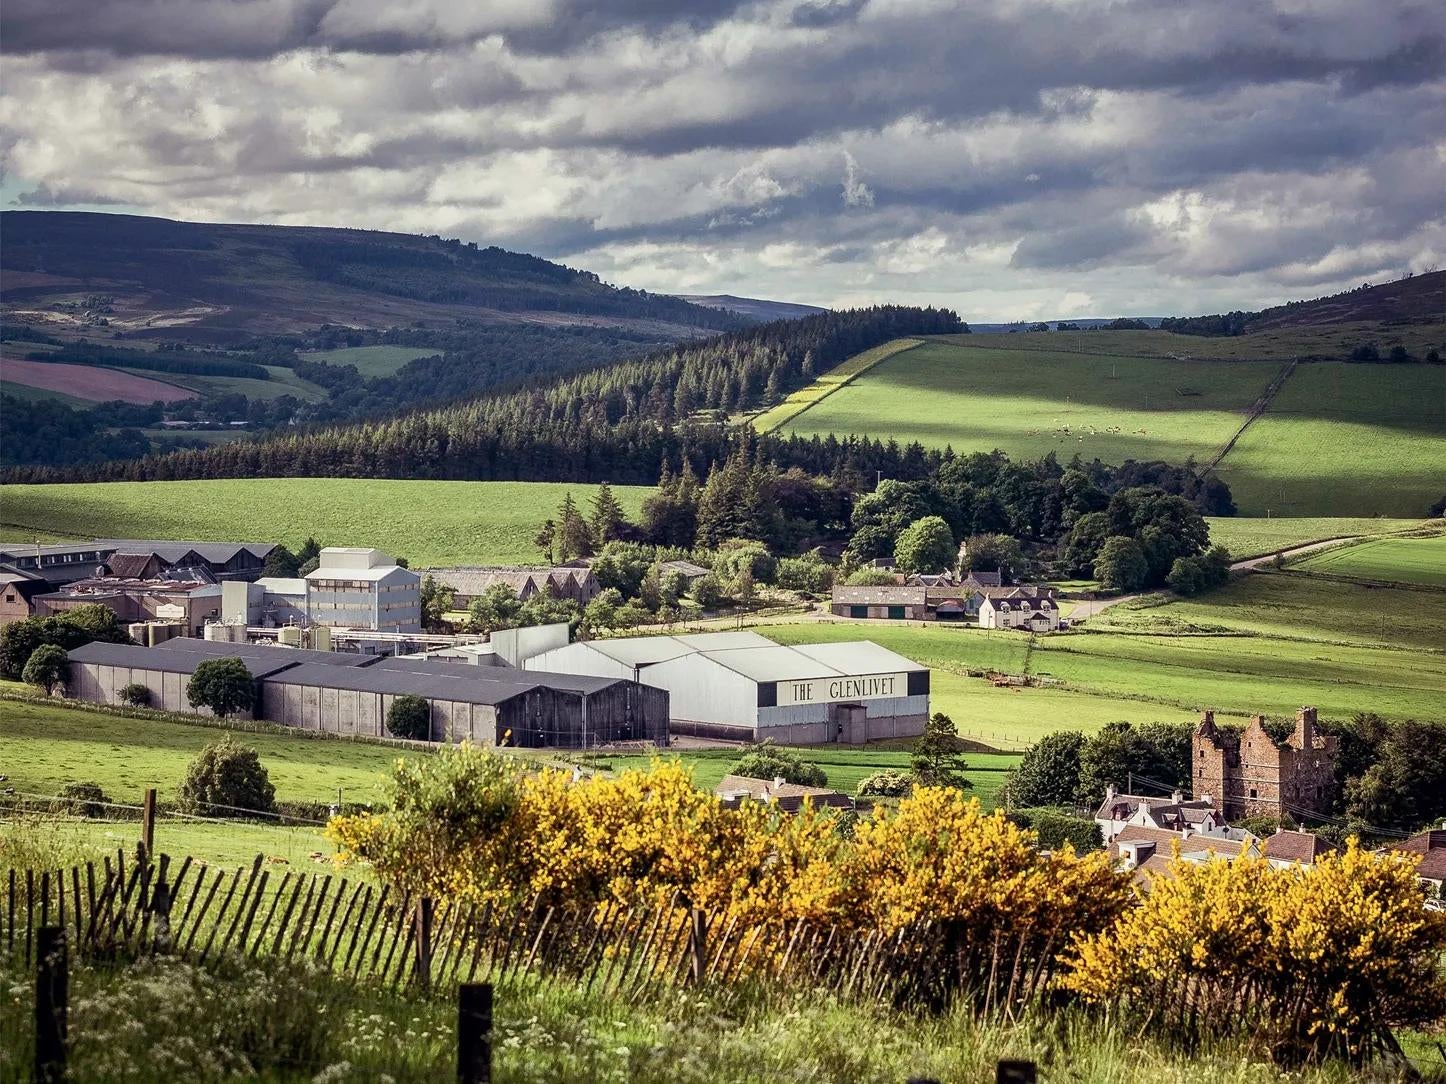 The Glenlivet distillery and its surroundings near Ballindalloch in Moray, Scotland.